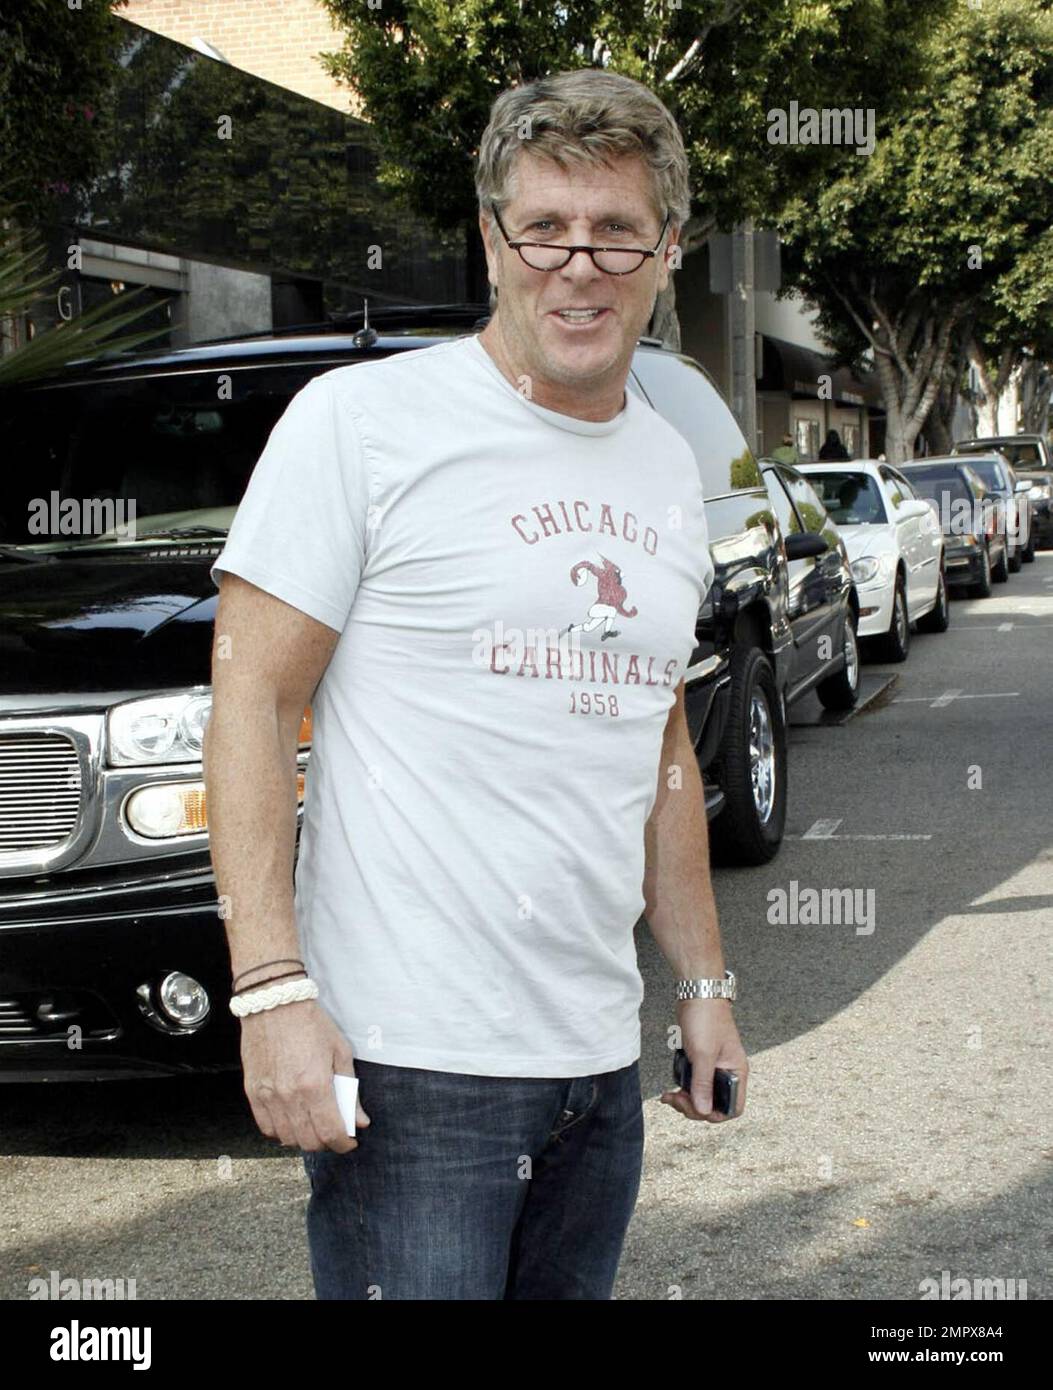 Exclusive!! Donny Deutsch, advertising executive and host of the CNBC talk show 'The Big Idea With Donny Deutsch,' met friends on Robertson Blvd. before heading elsewhere for lunch. West Hollywood, Calif. 11/09/07. Stock Photo